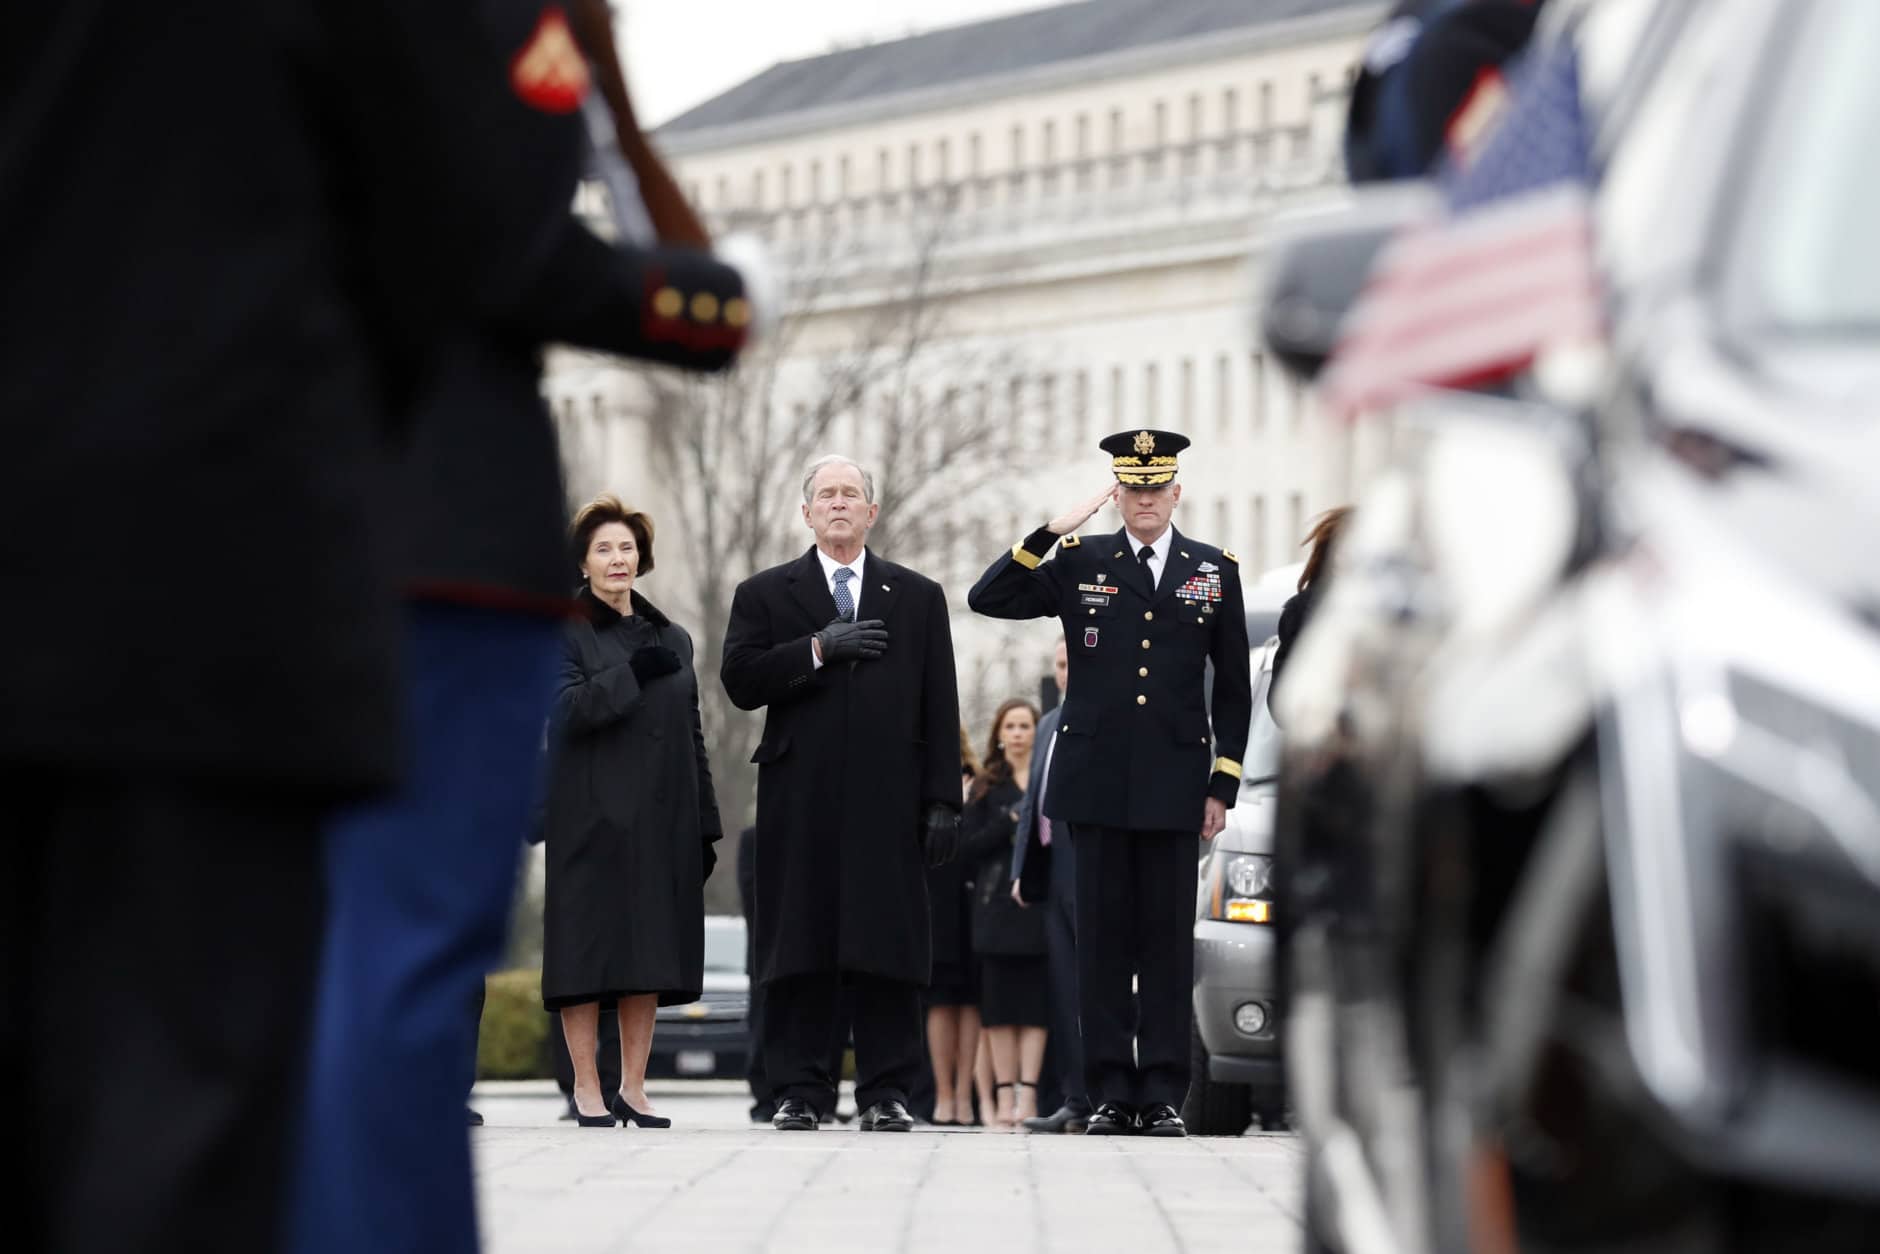 Former President George W. Bush and former first lady Laura Bush put their hands over their hearts as a joint services military honor guard carries the flag-draped casket of former U.S. President George H. W. Bush from the U.S. Capitol to transport it to Washington National Cathedral December 5, 2018 in Washington, DC. President Bush will be buried at his final resting place at the George H.W. Bush Presidential Library at Texas A&amp;M University in College Station, Texas. A WWII combat veteran, Bush served as a member of Congress from Texas, ambassador to the United Nations, director of the CIA, vice president and 41st president of the United States.  (Photo by Alex Brandon - Pool/Getty Images)